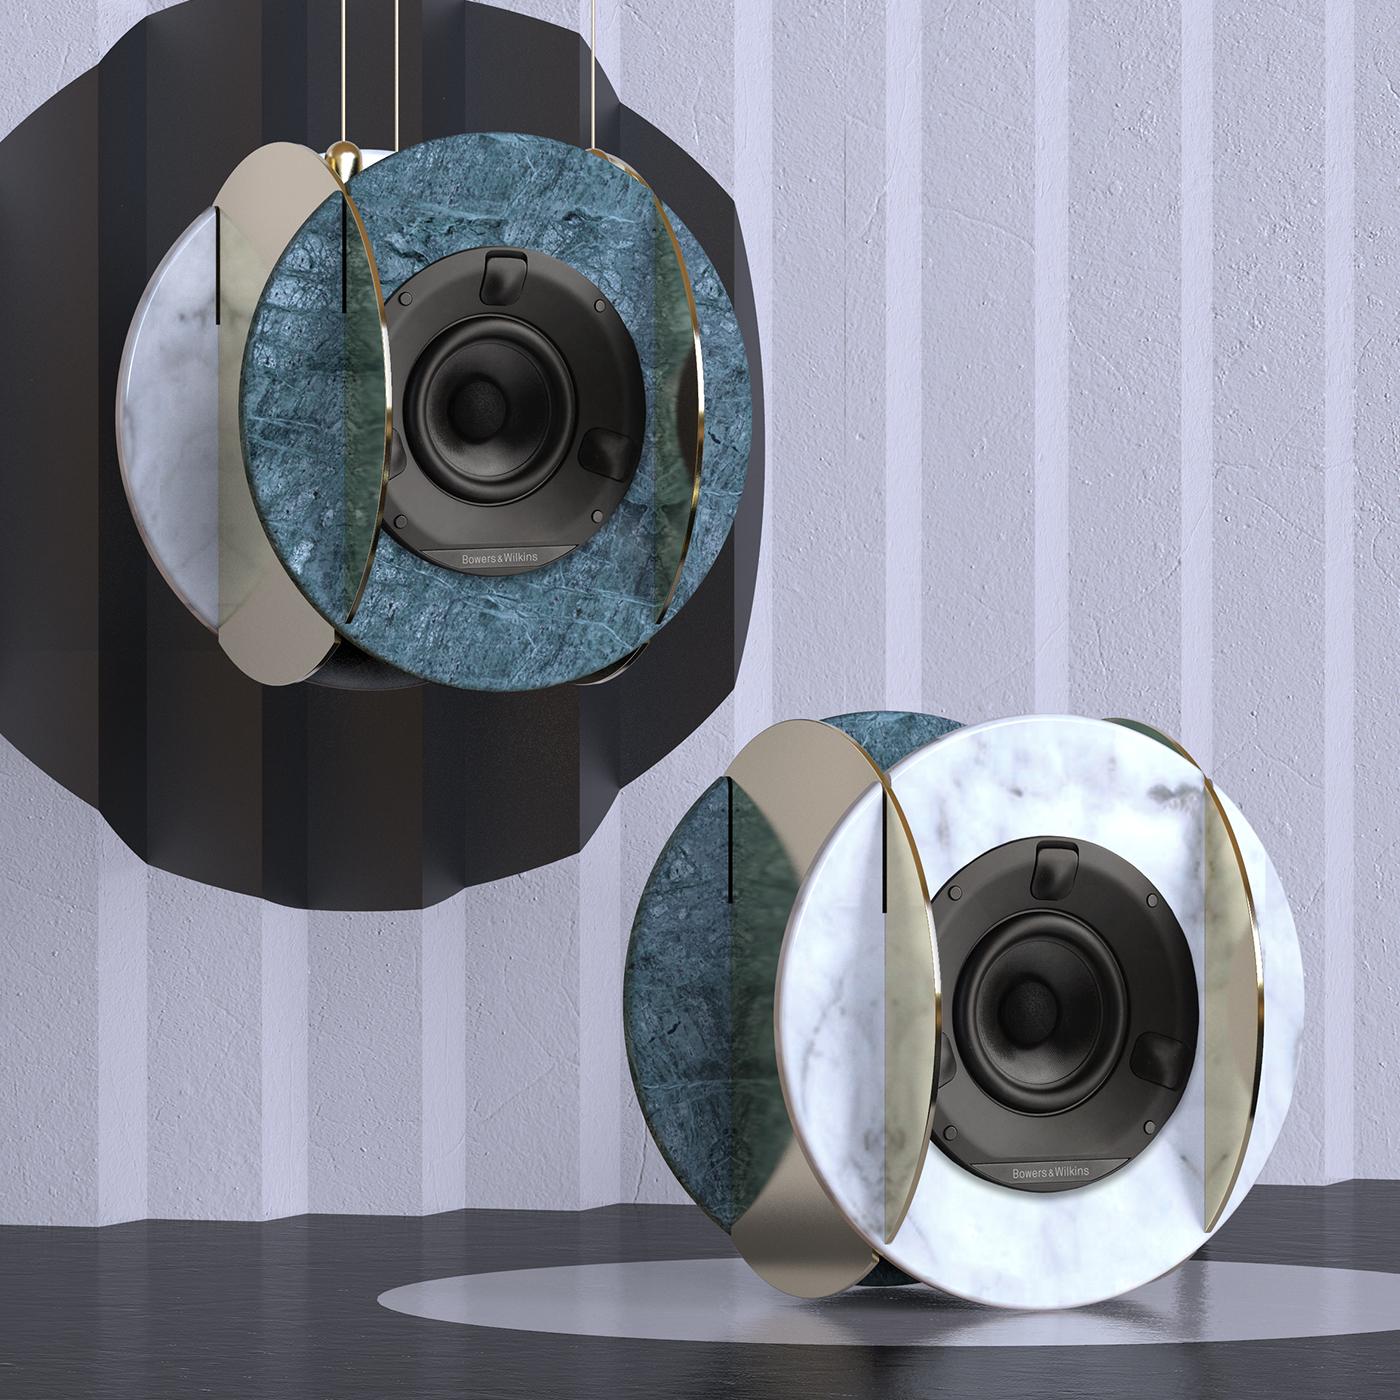 A timeless material gets a new calling in the Senato Marble Speaker Case by Efrem Bonacina and Pier Lomascolo. Crafted in brilliant rings of Carrara and Verde Imperial marbles with brass accents, the piece turns the speakers into a chic decorative